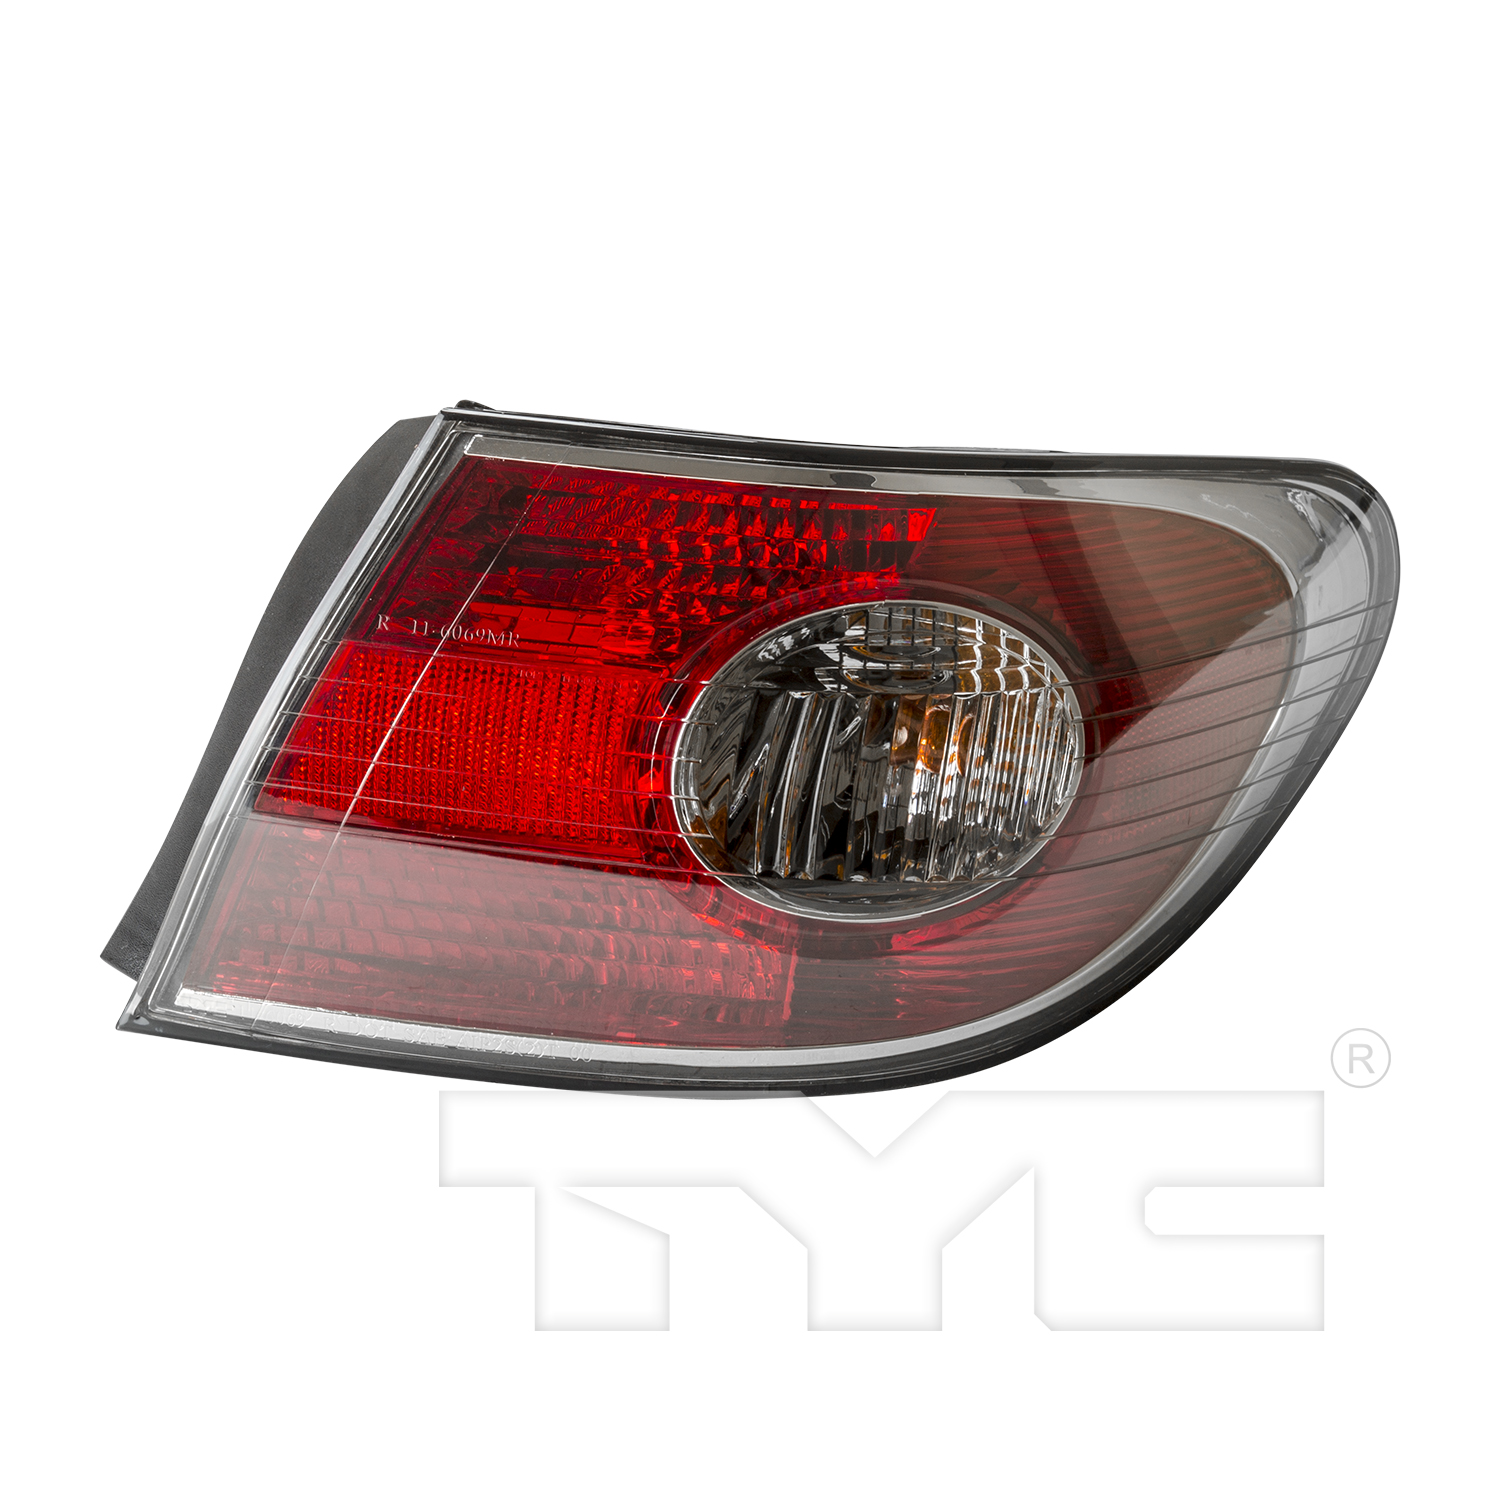 Aftermarket TAILLIGHTS for LEXUS - ES330, ES330,04-04,RT Taillamp assy